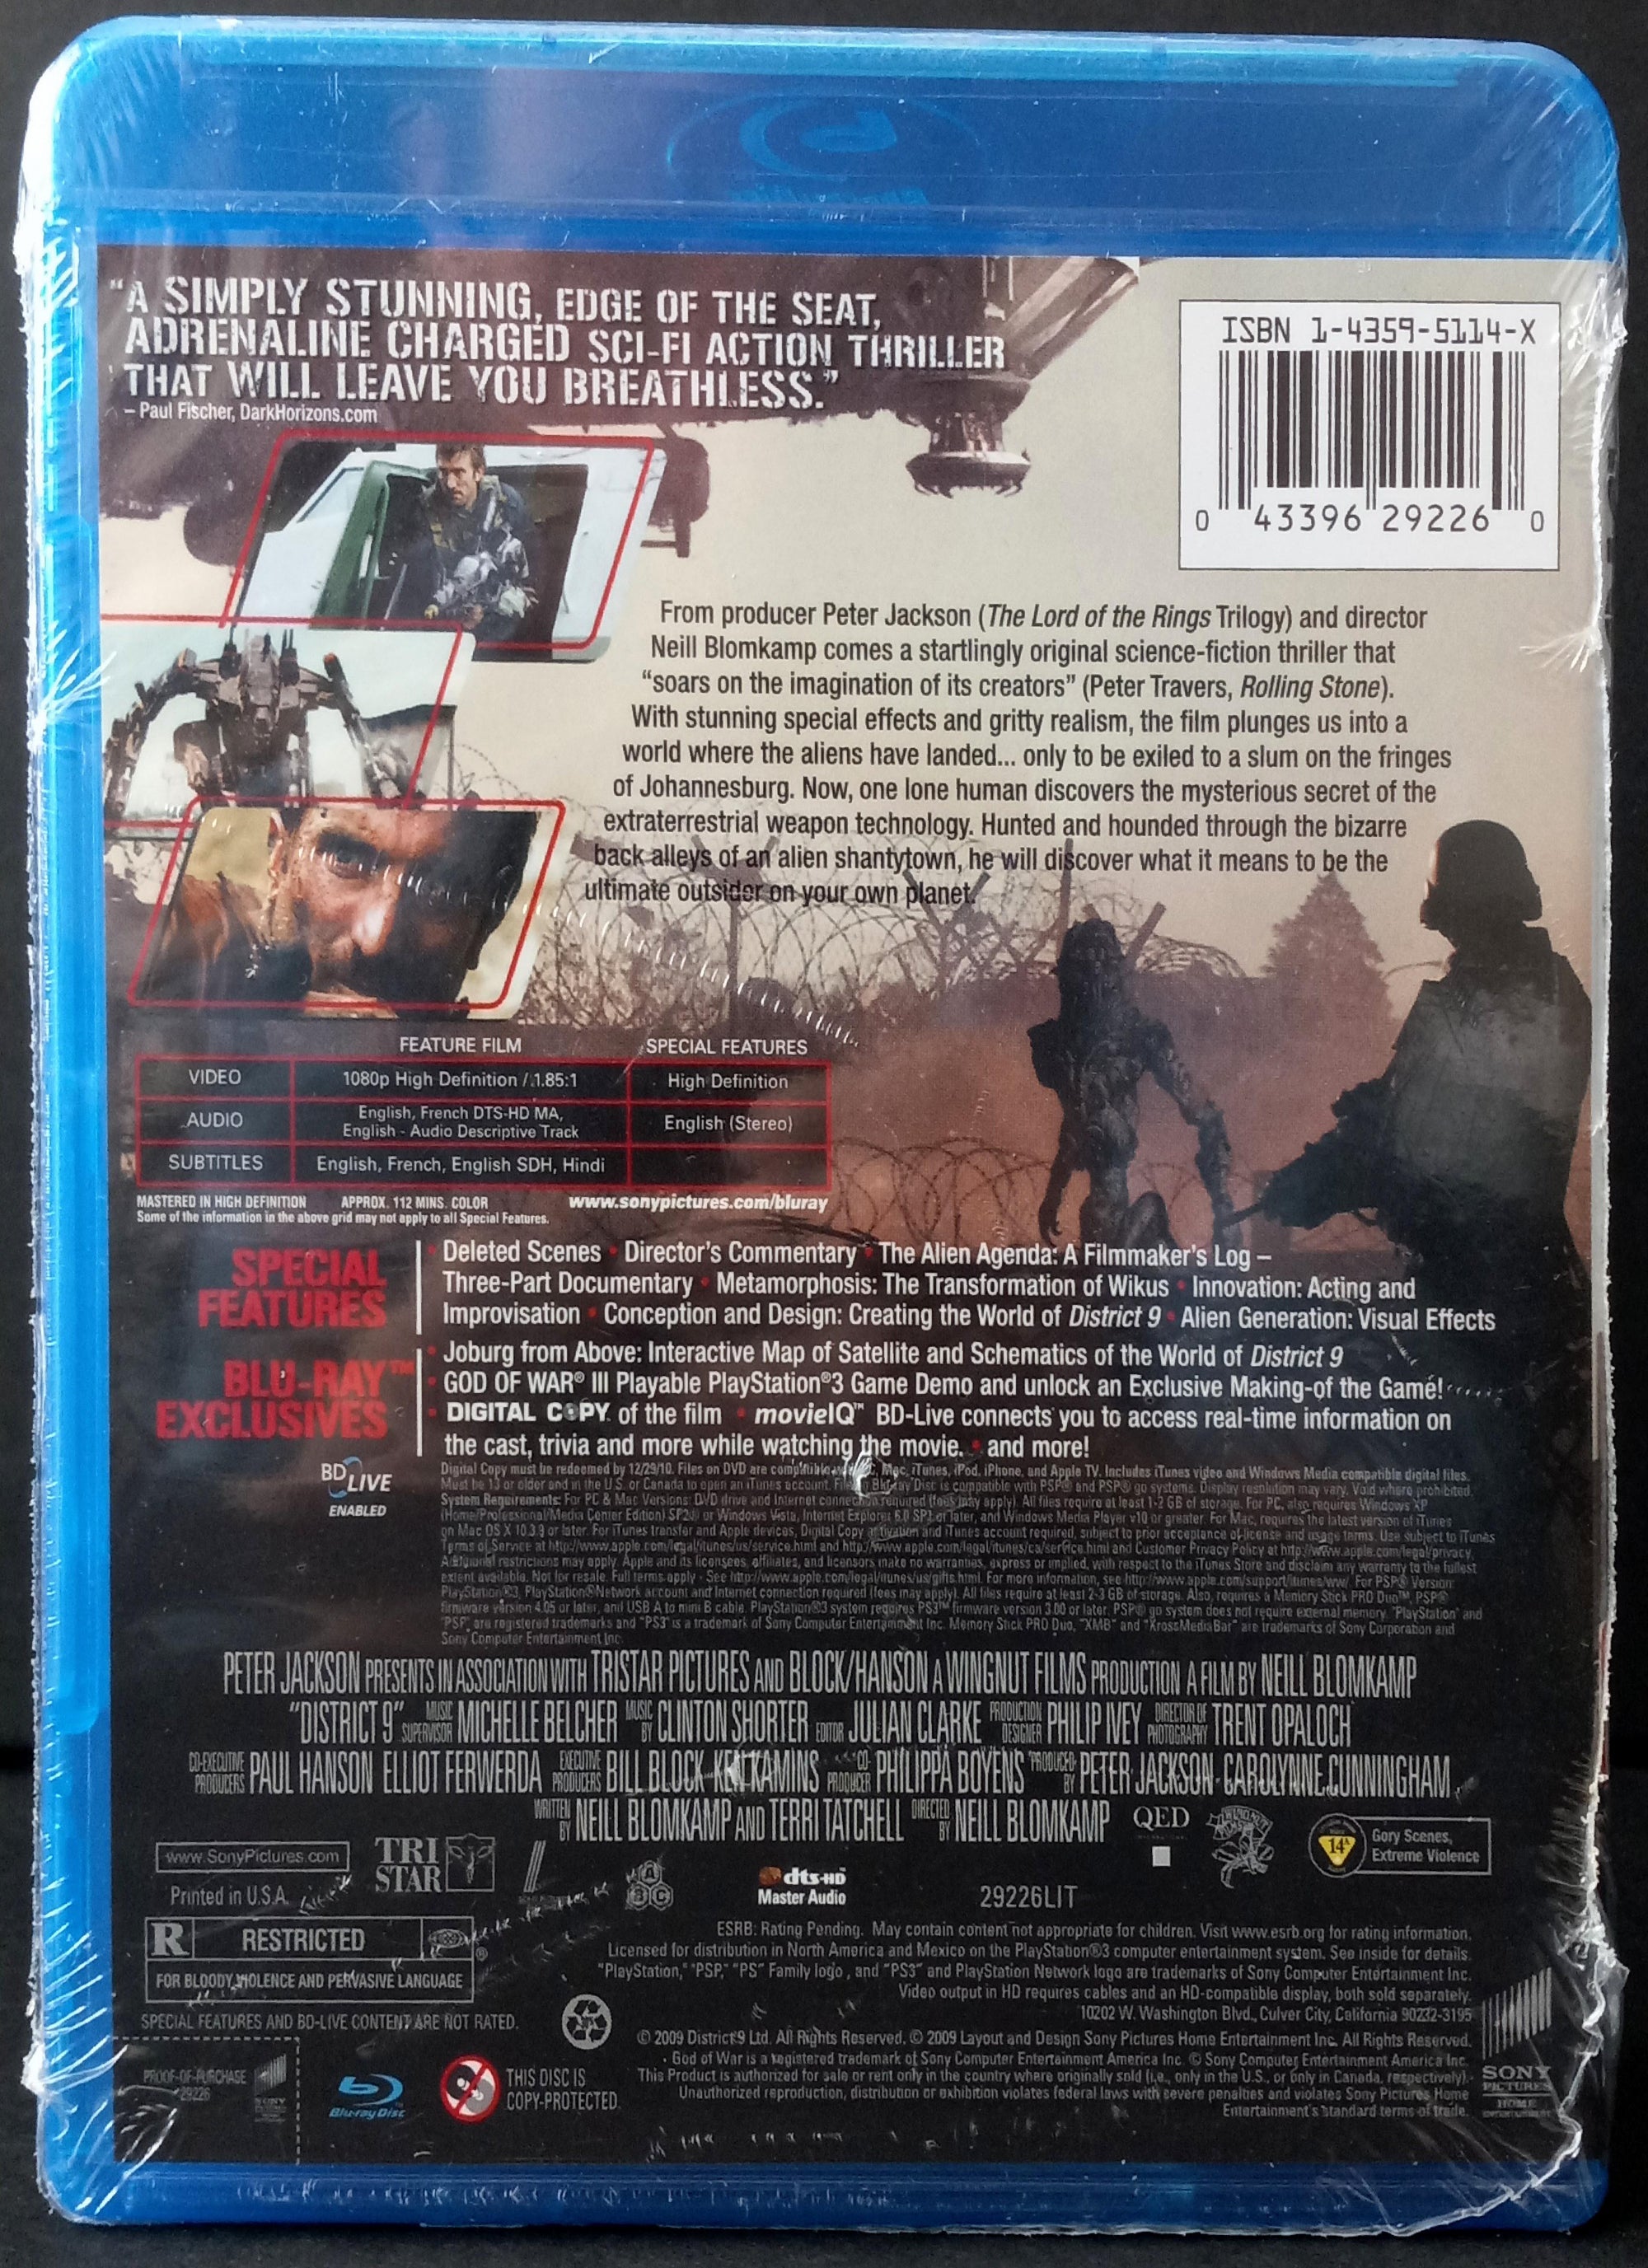 DISTRICT 9 - Blu-Ray (sealed), 2009